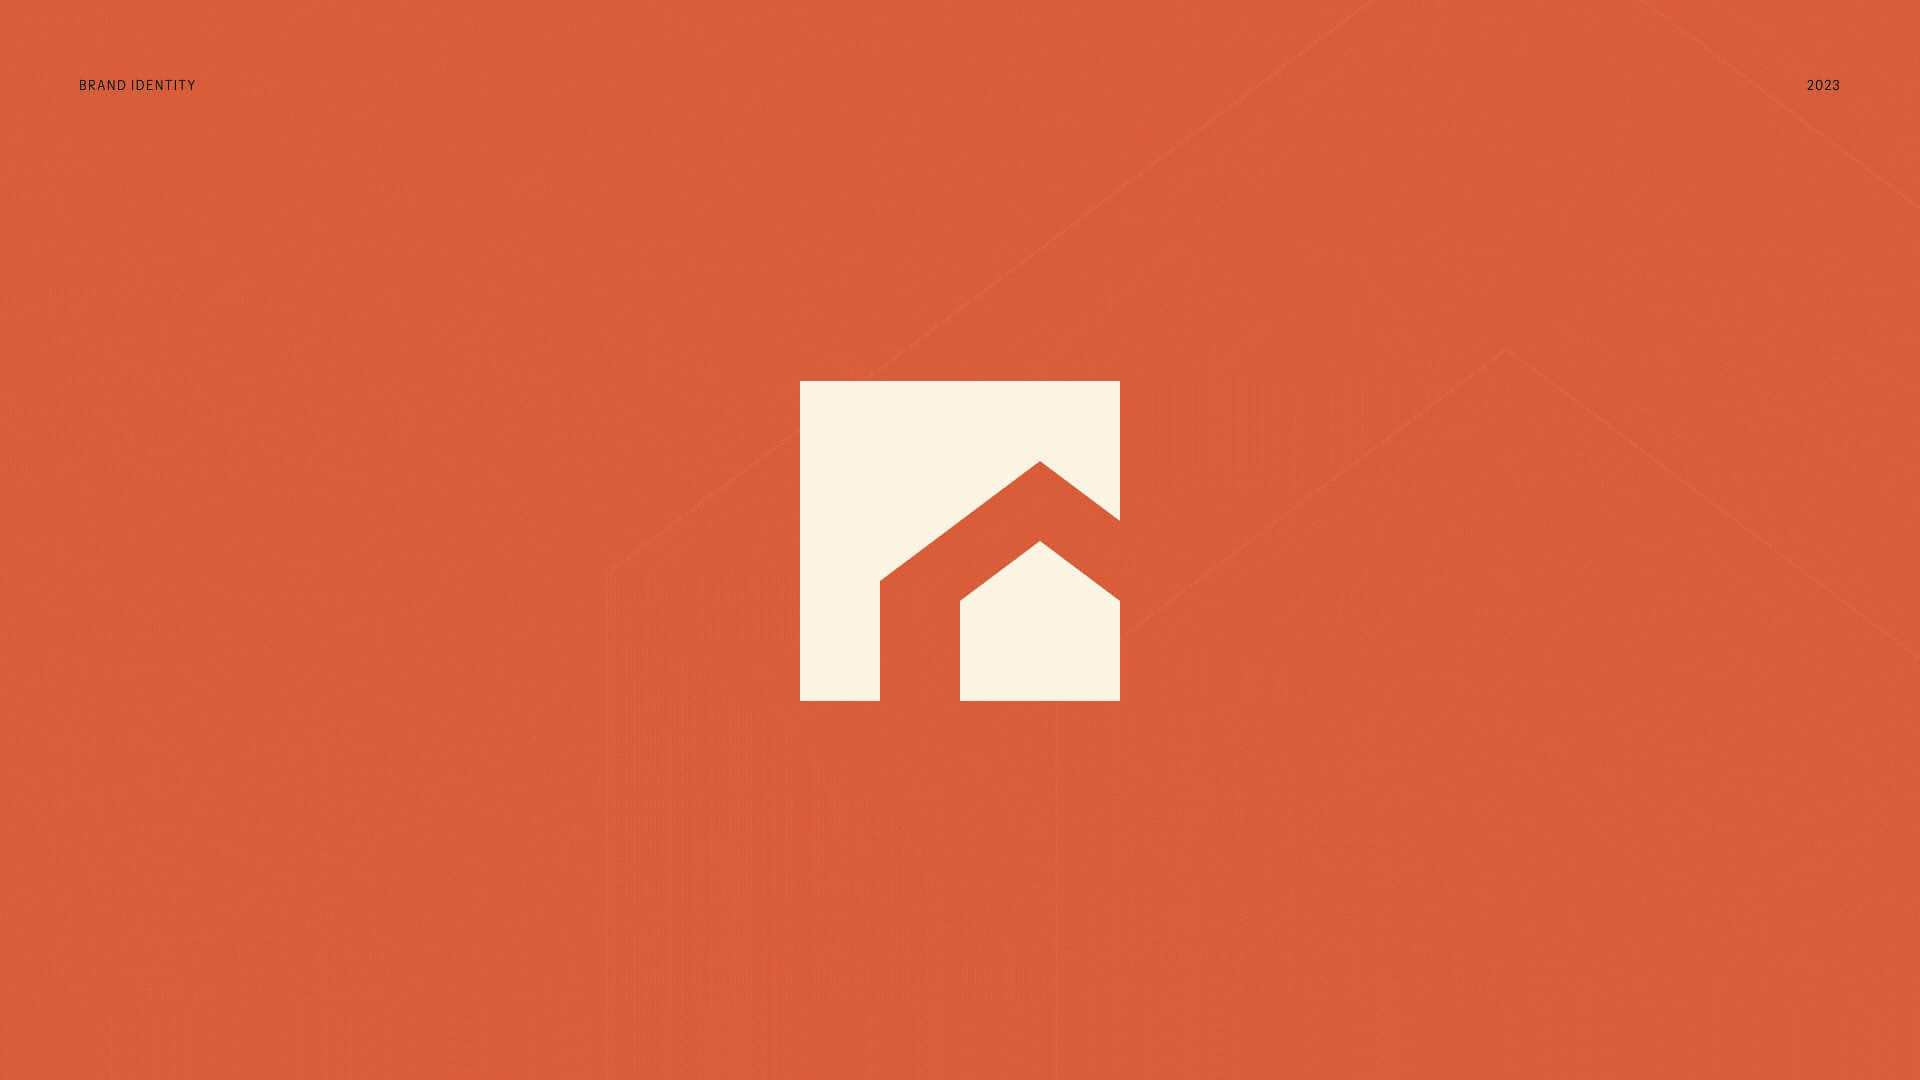 Logo design and brand identity for Ohio-based real estate team called REsource Property Sales Team